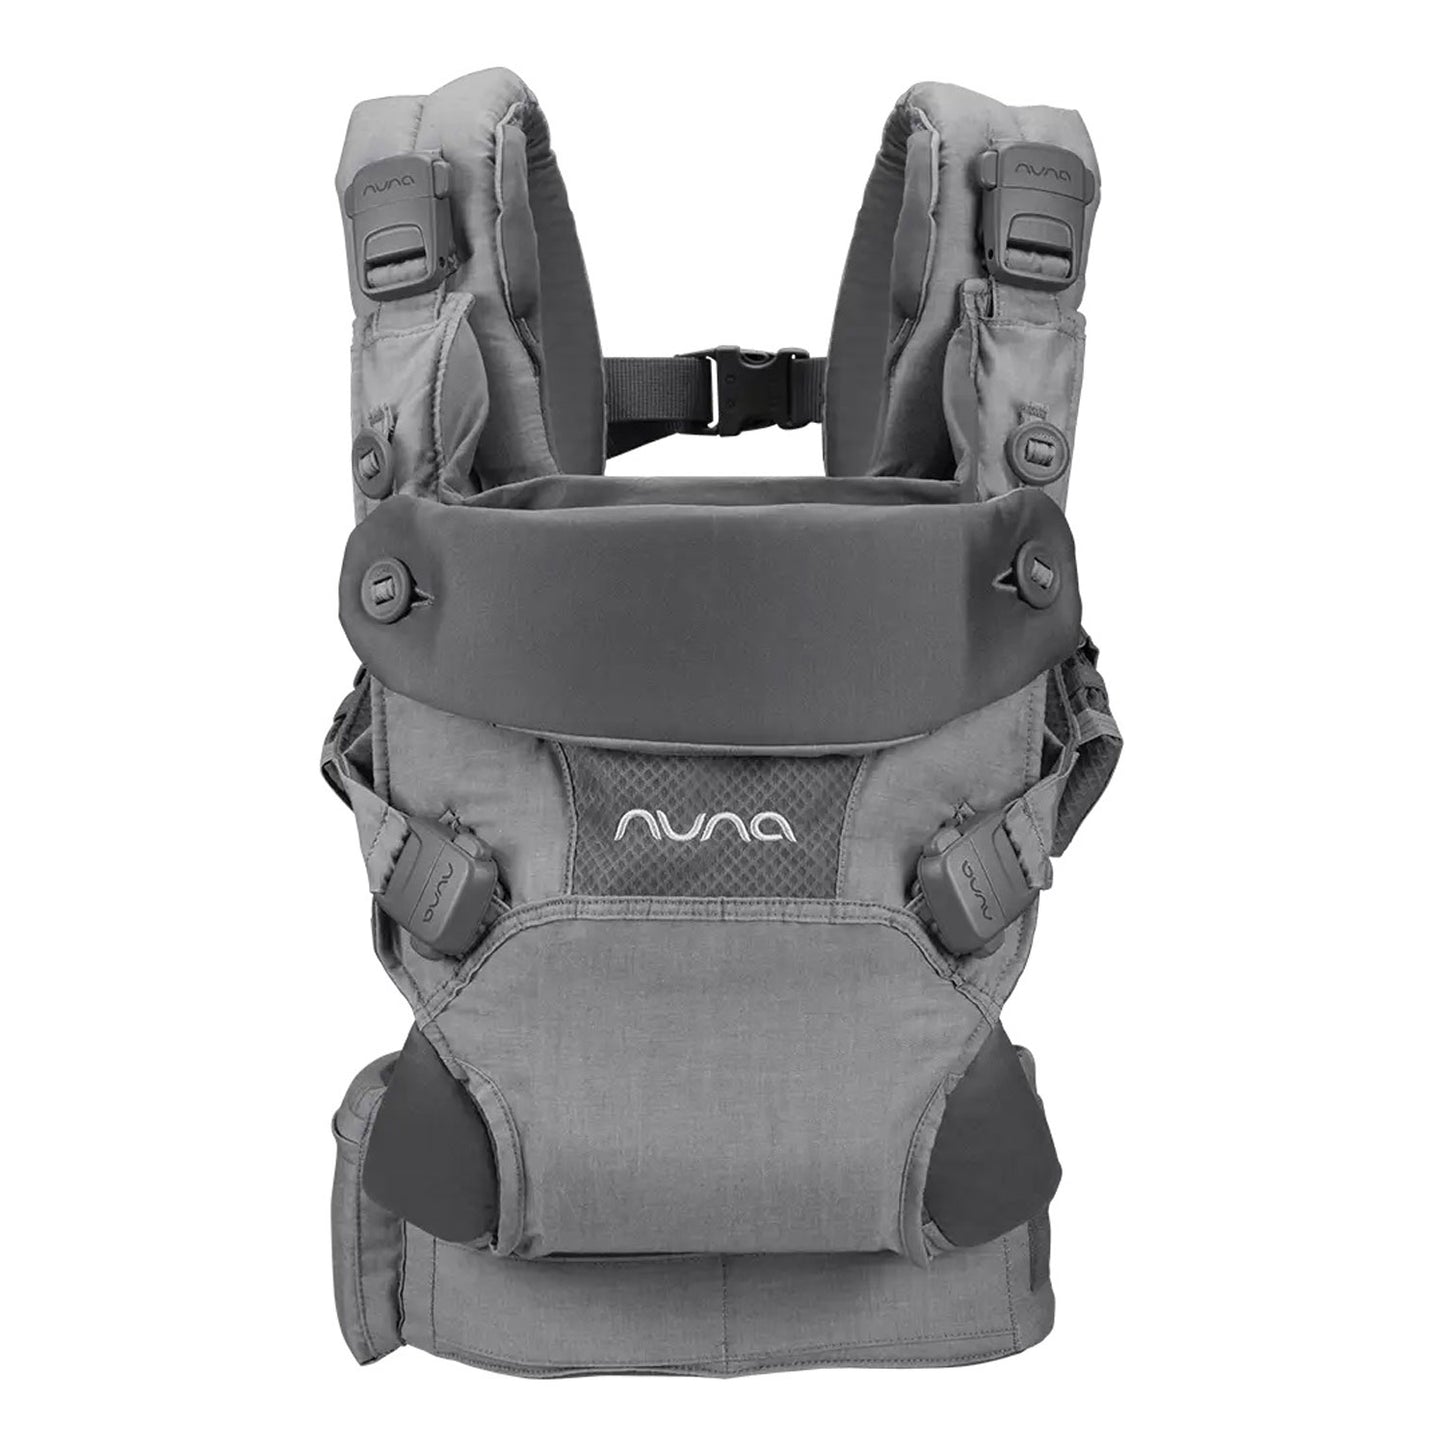 Nuna CUDL 4-in-1 Carrier - Softened Thunder